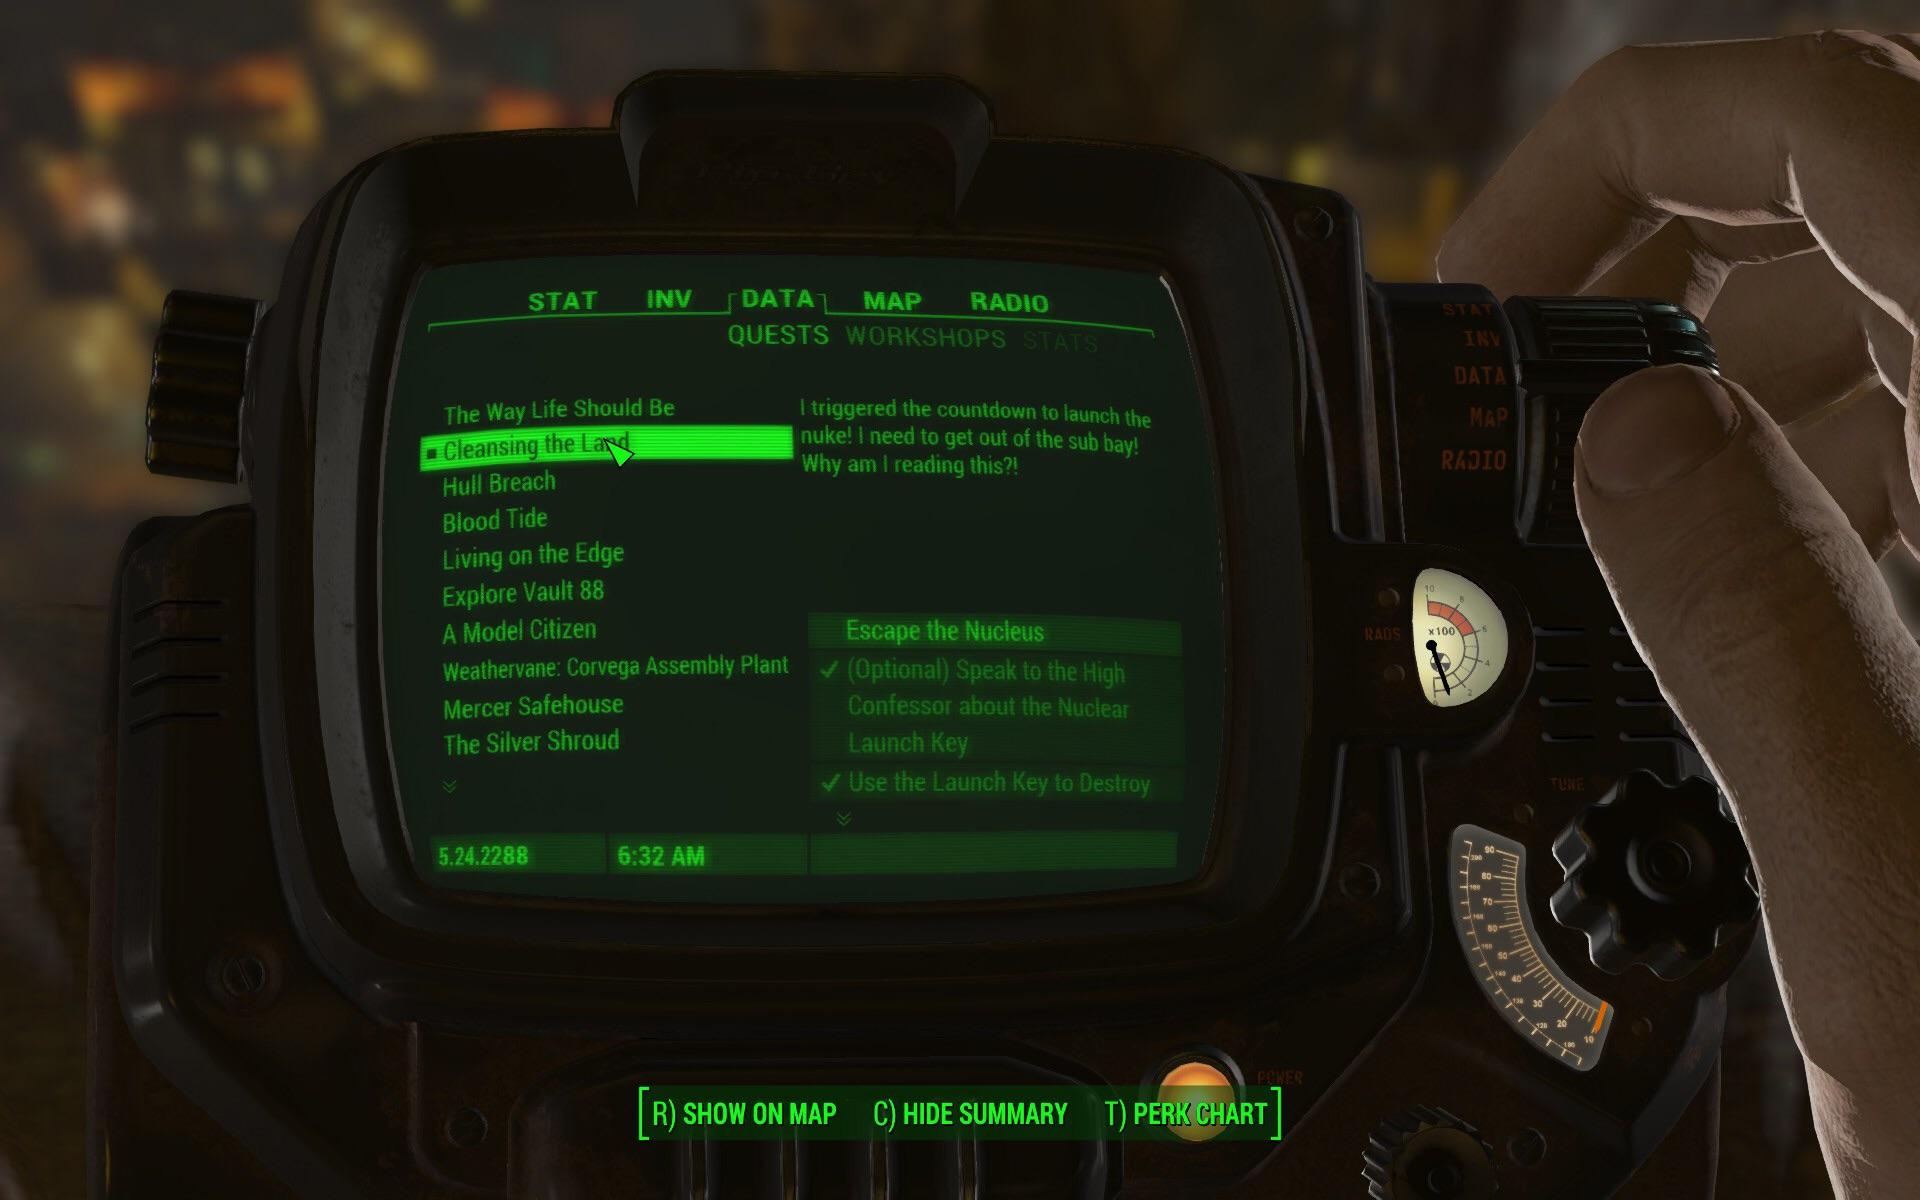 Image of the game Fallout 4 showing a Pip-Boy device with a quest on it